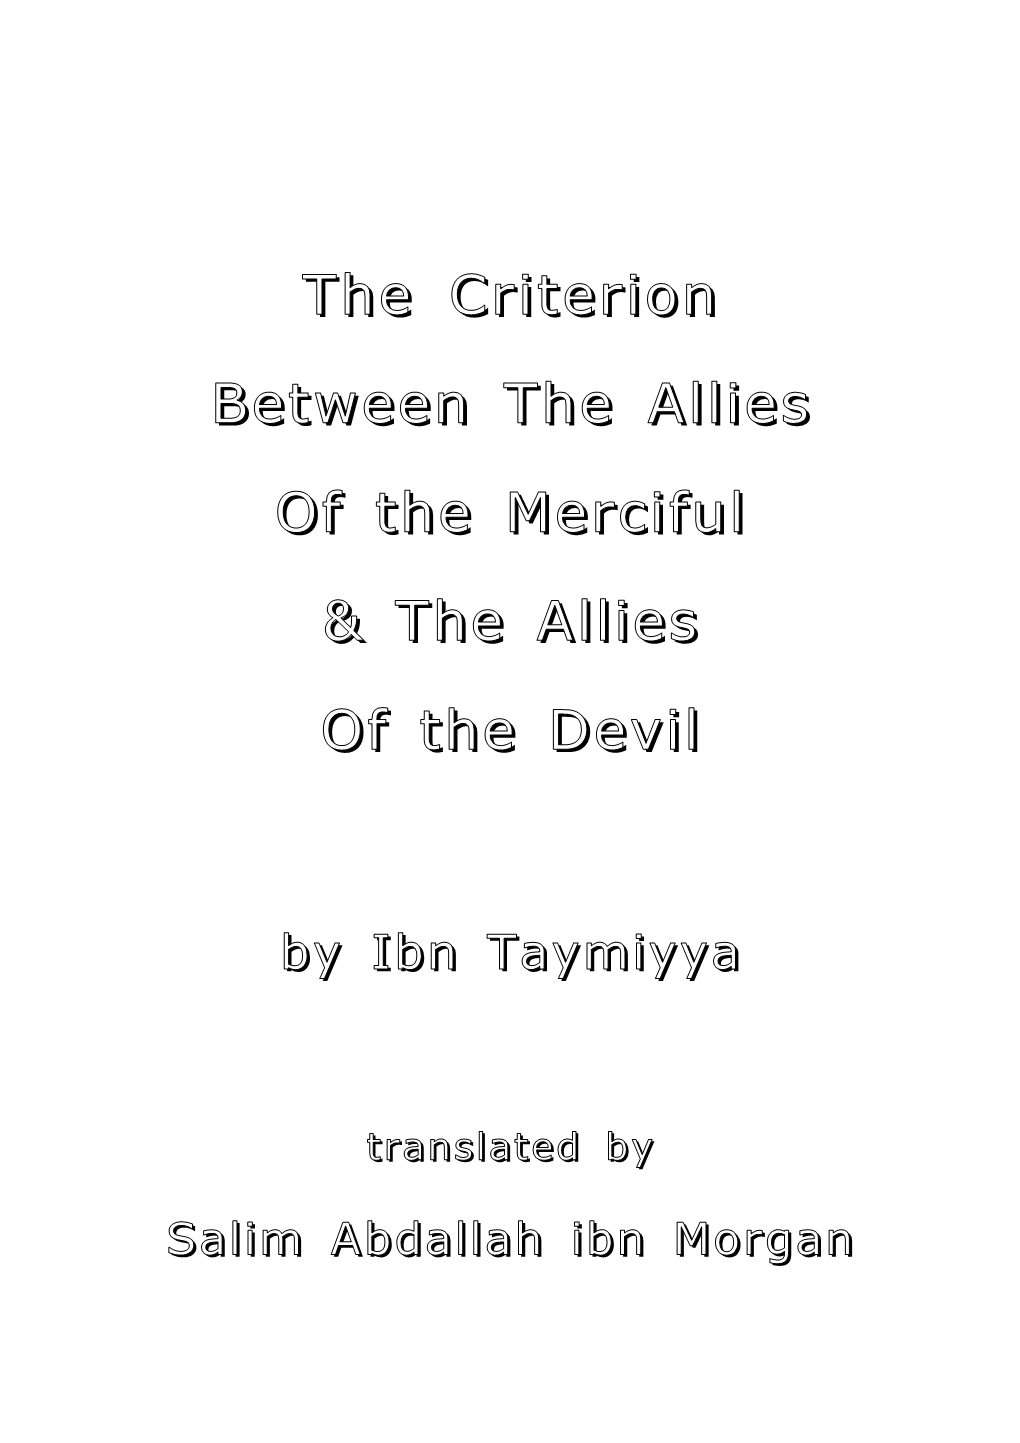 The Criterion Between the Allies of the Merciful and the Allies of the Devil